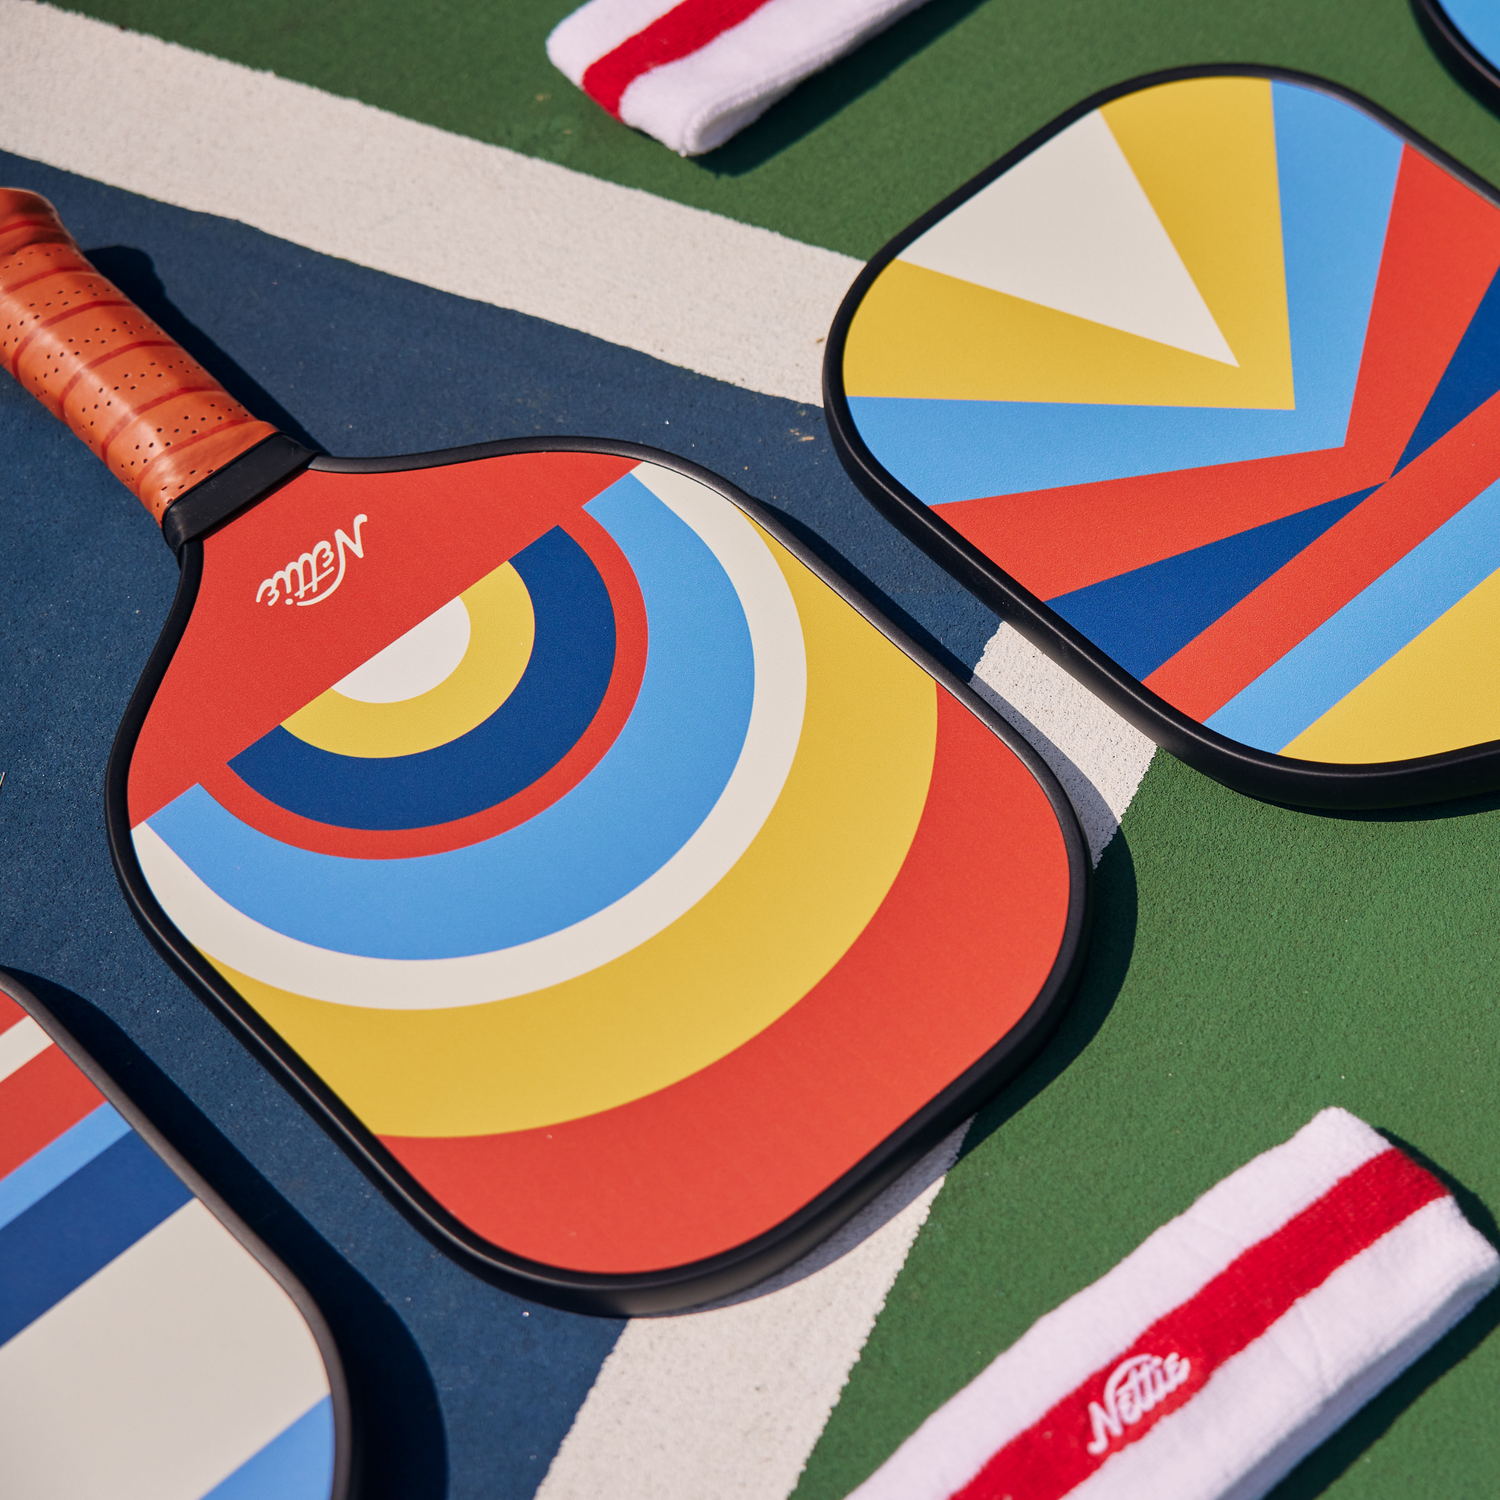 Bestselling Pickleball Set Is $50 Off Right Now